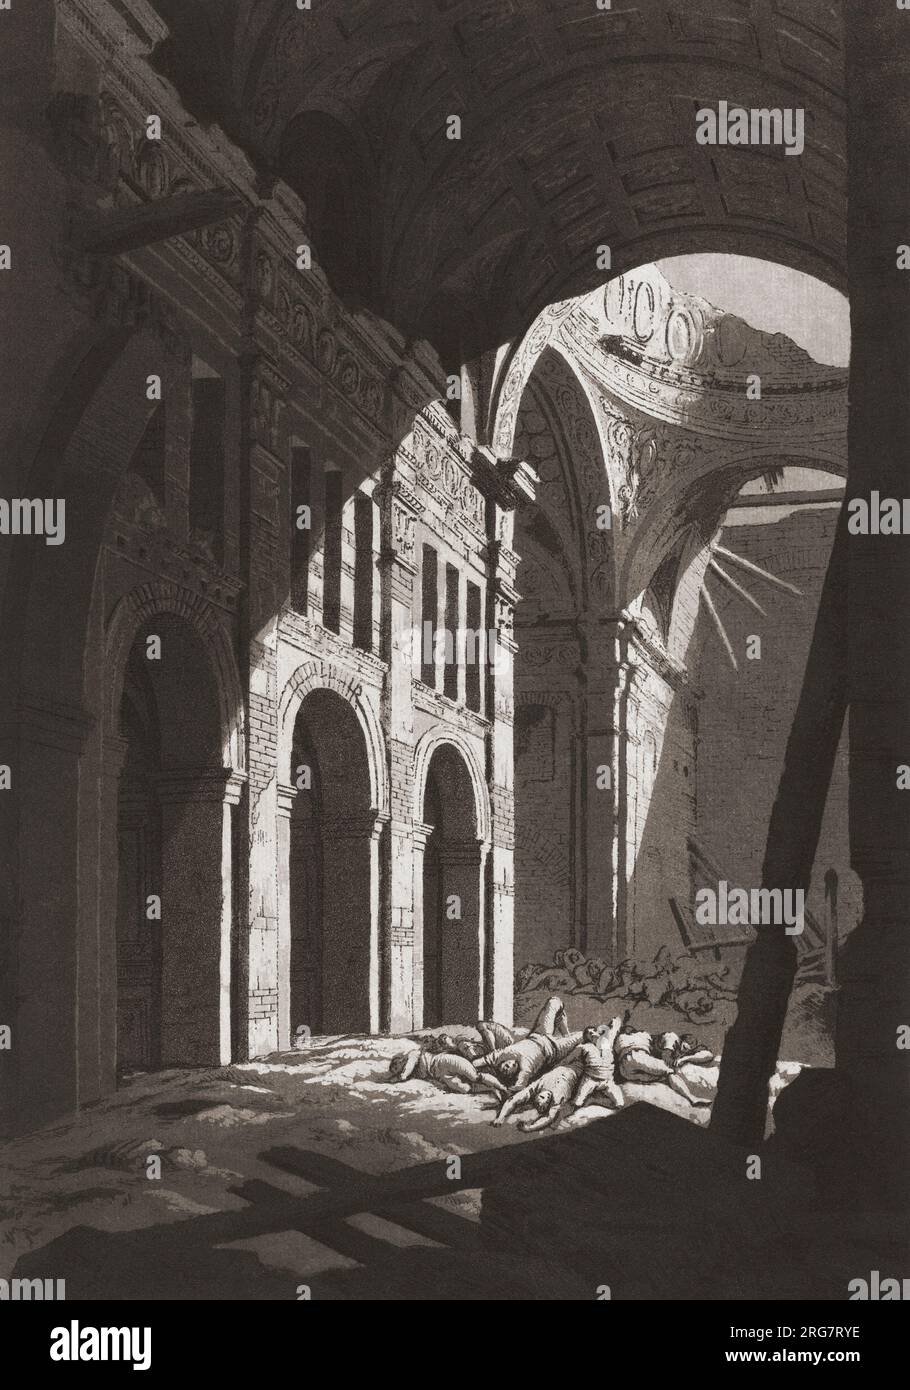 Ruins of the Church of Carmen, Zaragoza, Spain after its second siege by the French, 1808 to 1809, during the Peninsula War.  After a print by Juan Galvez and Fernando Brambia. Stock Photo